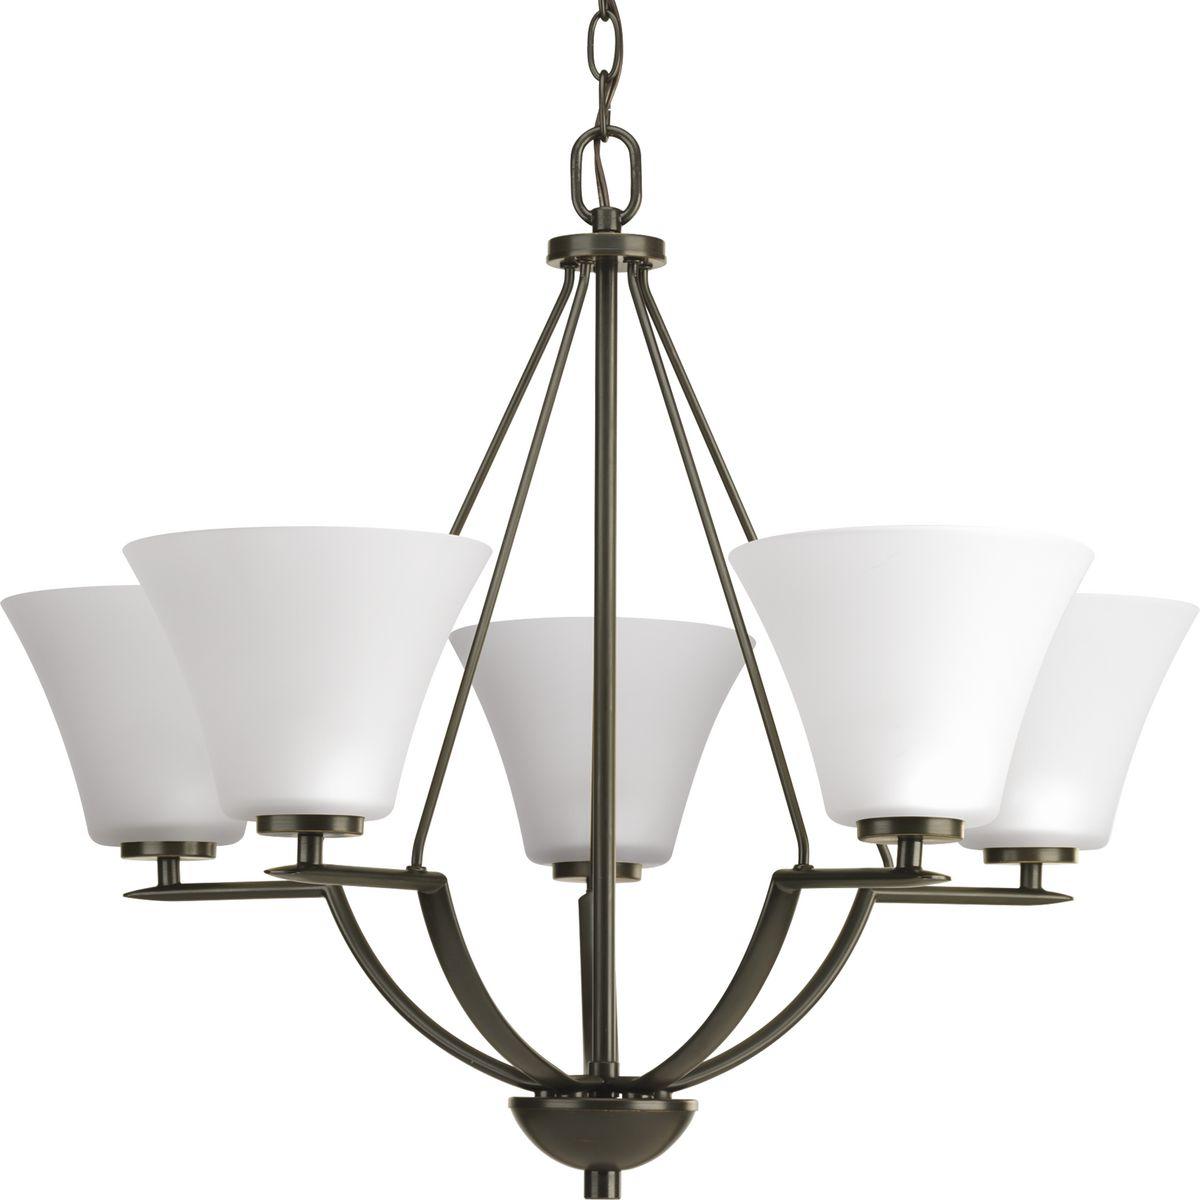 Hubbell P4623-20W Five-light chandelier with white etched glass from the Bravo collection. Linear elements stream throughout the fixture to compose a relaxed but exotic ambiance. Generously scaled glass shades add distinction against the Antique Bronze finish and provide p